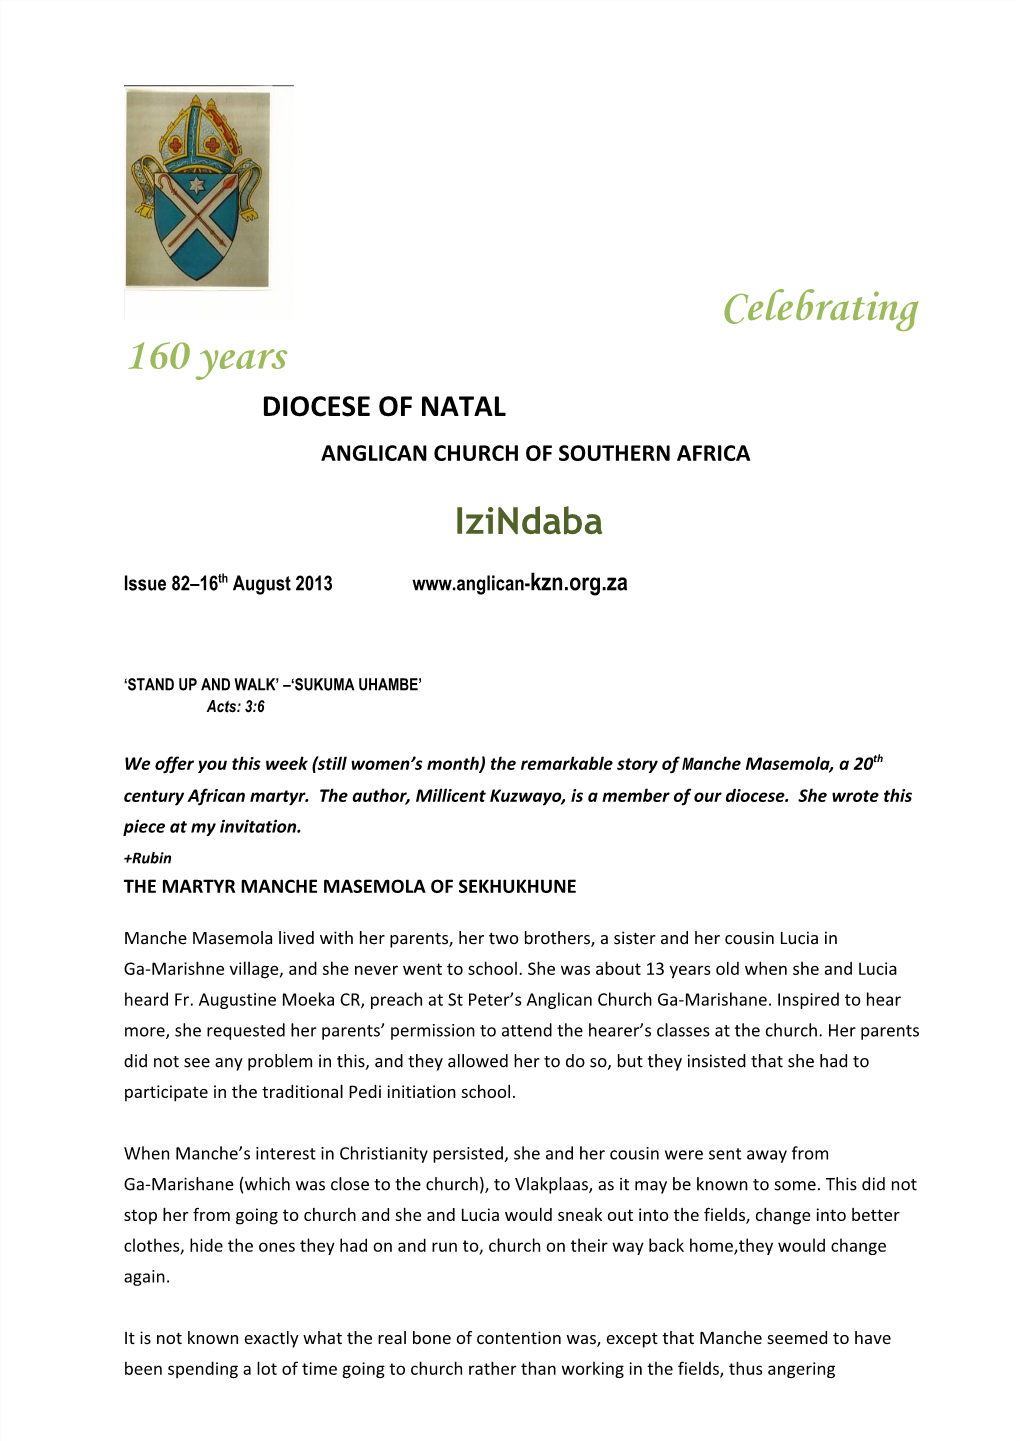 Celebrating 160 Years DIOCESE of NATAL ANGLICAN CHURCH of SOUTHERN AFRICA